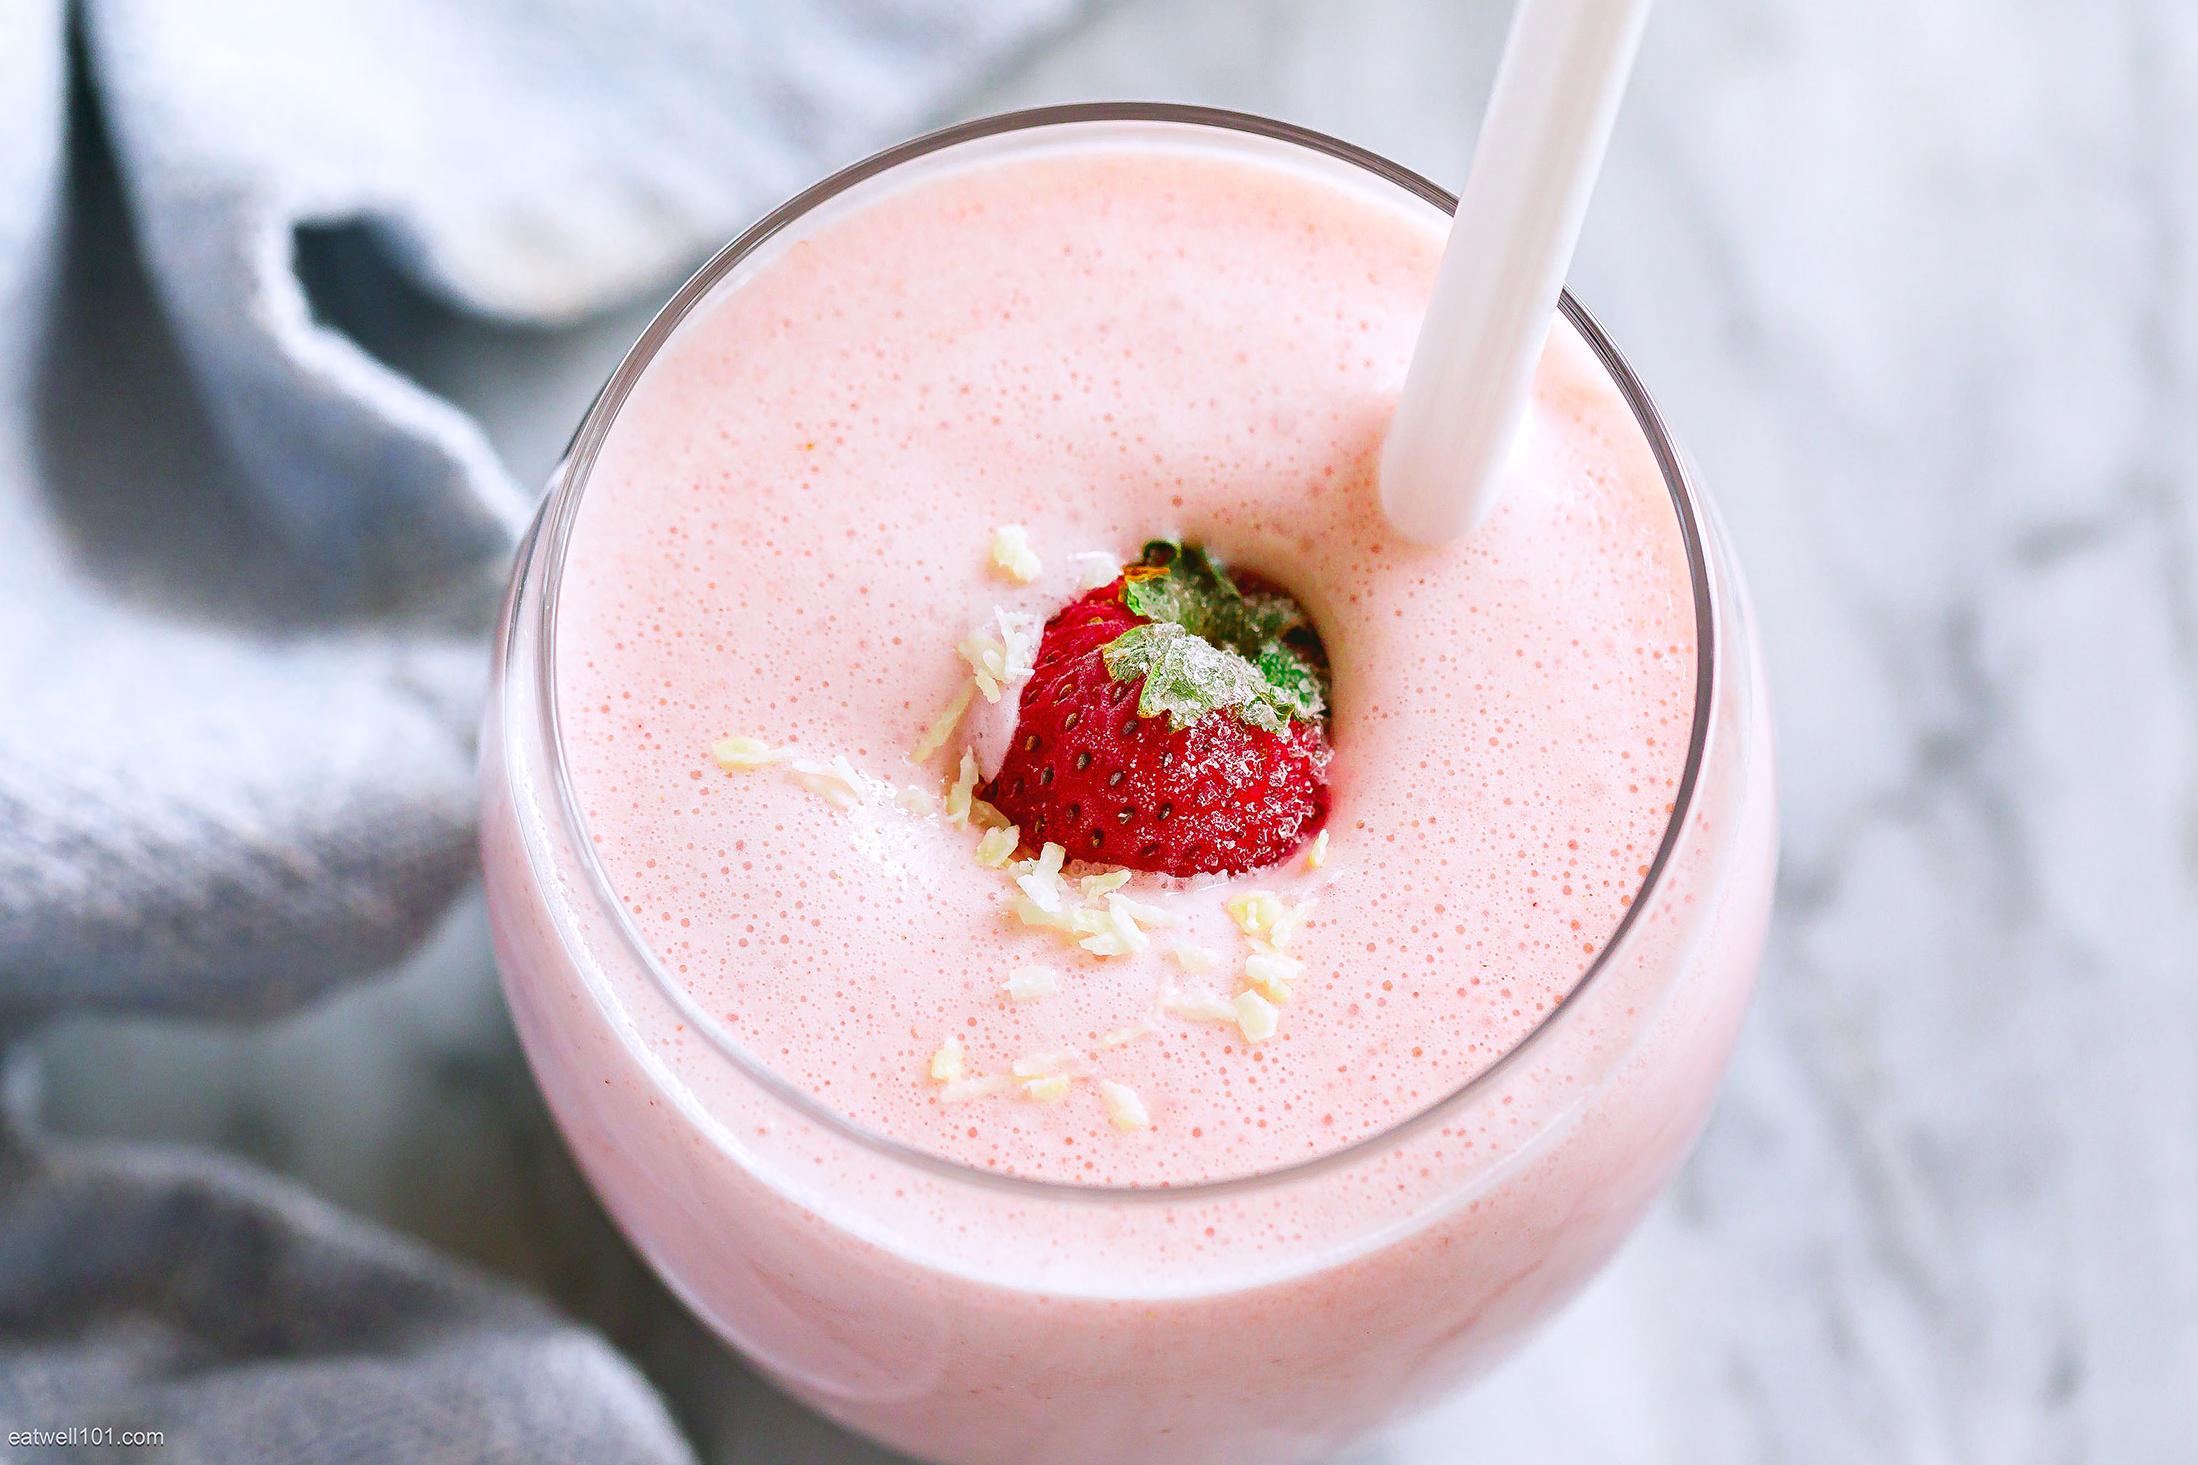  Sip into something healthy with this dairy-free smoothie